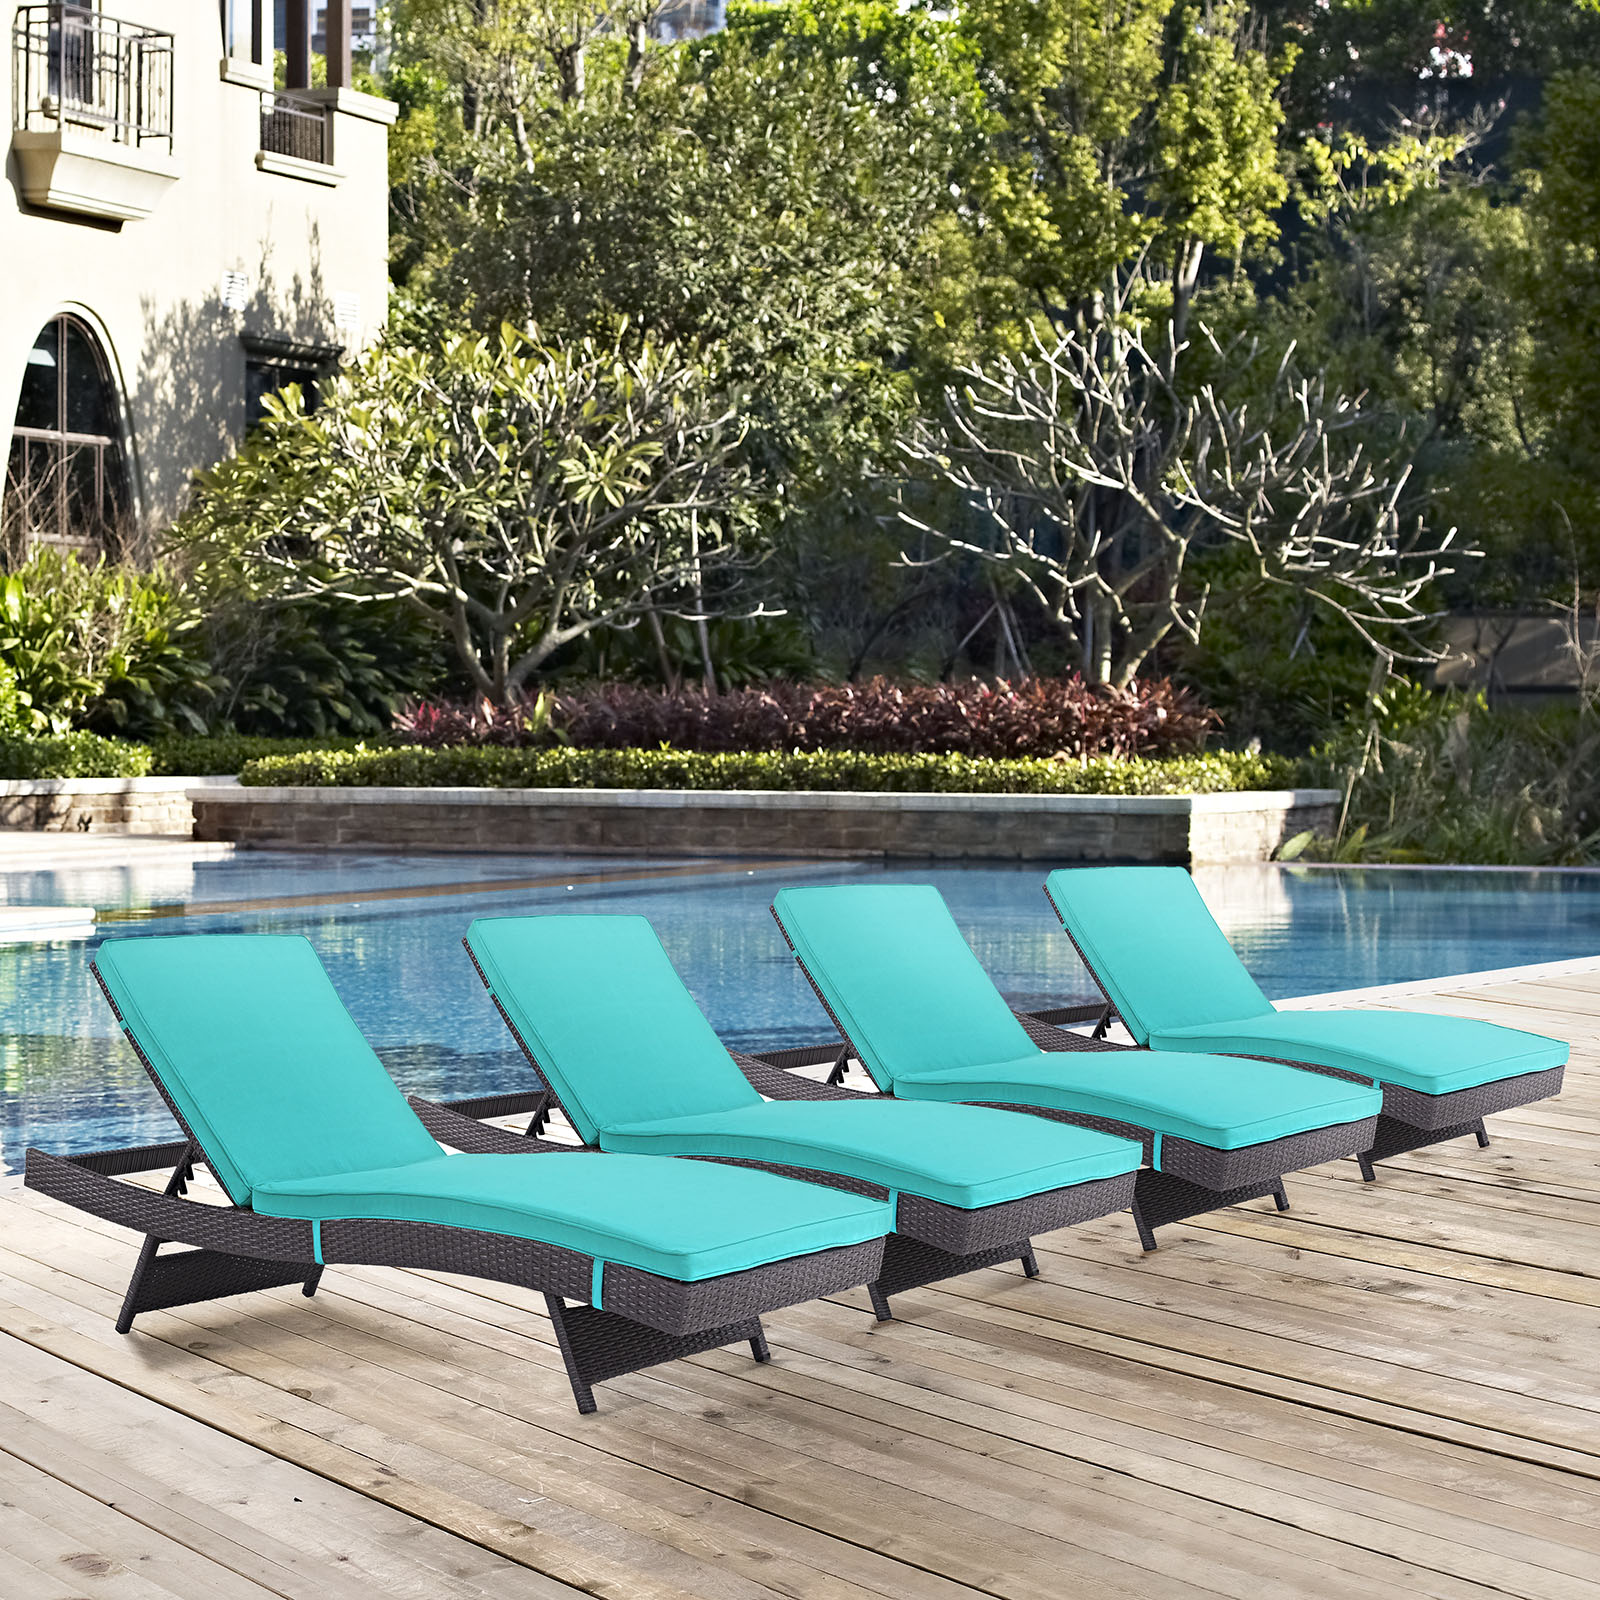 Modway Convene Chaise Outdoor Patio Set of 4 in Espresso Turquoise - image 1 of 5